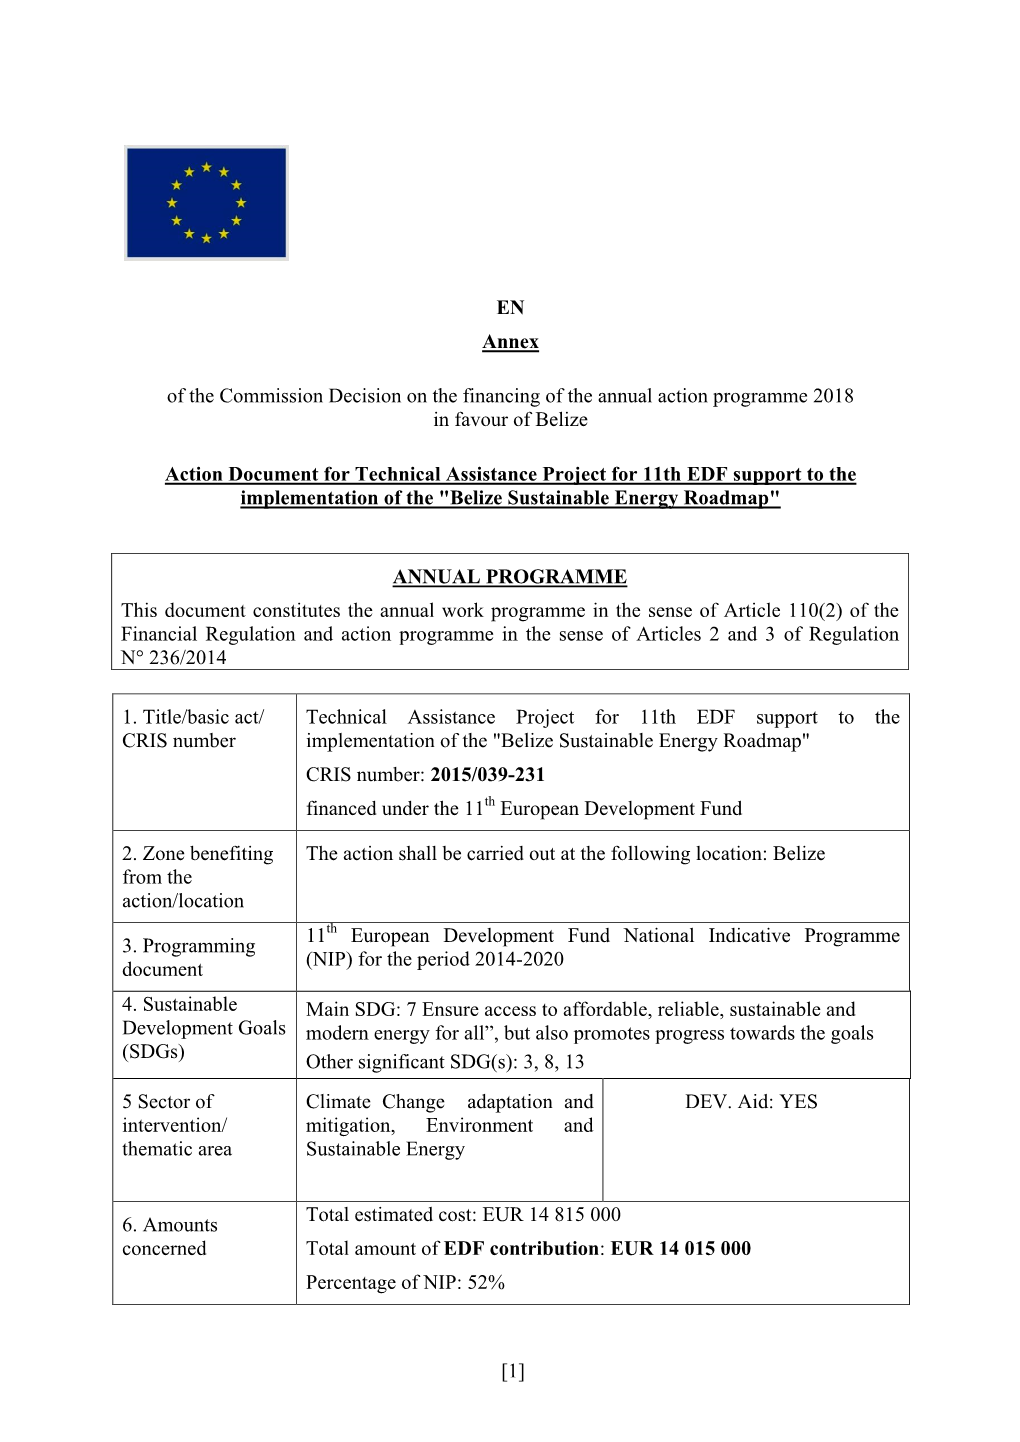 [1] EN Annex of the Commission Decision on the Financing of The